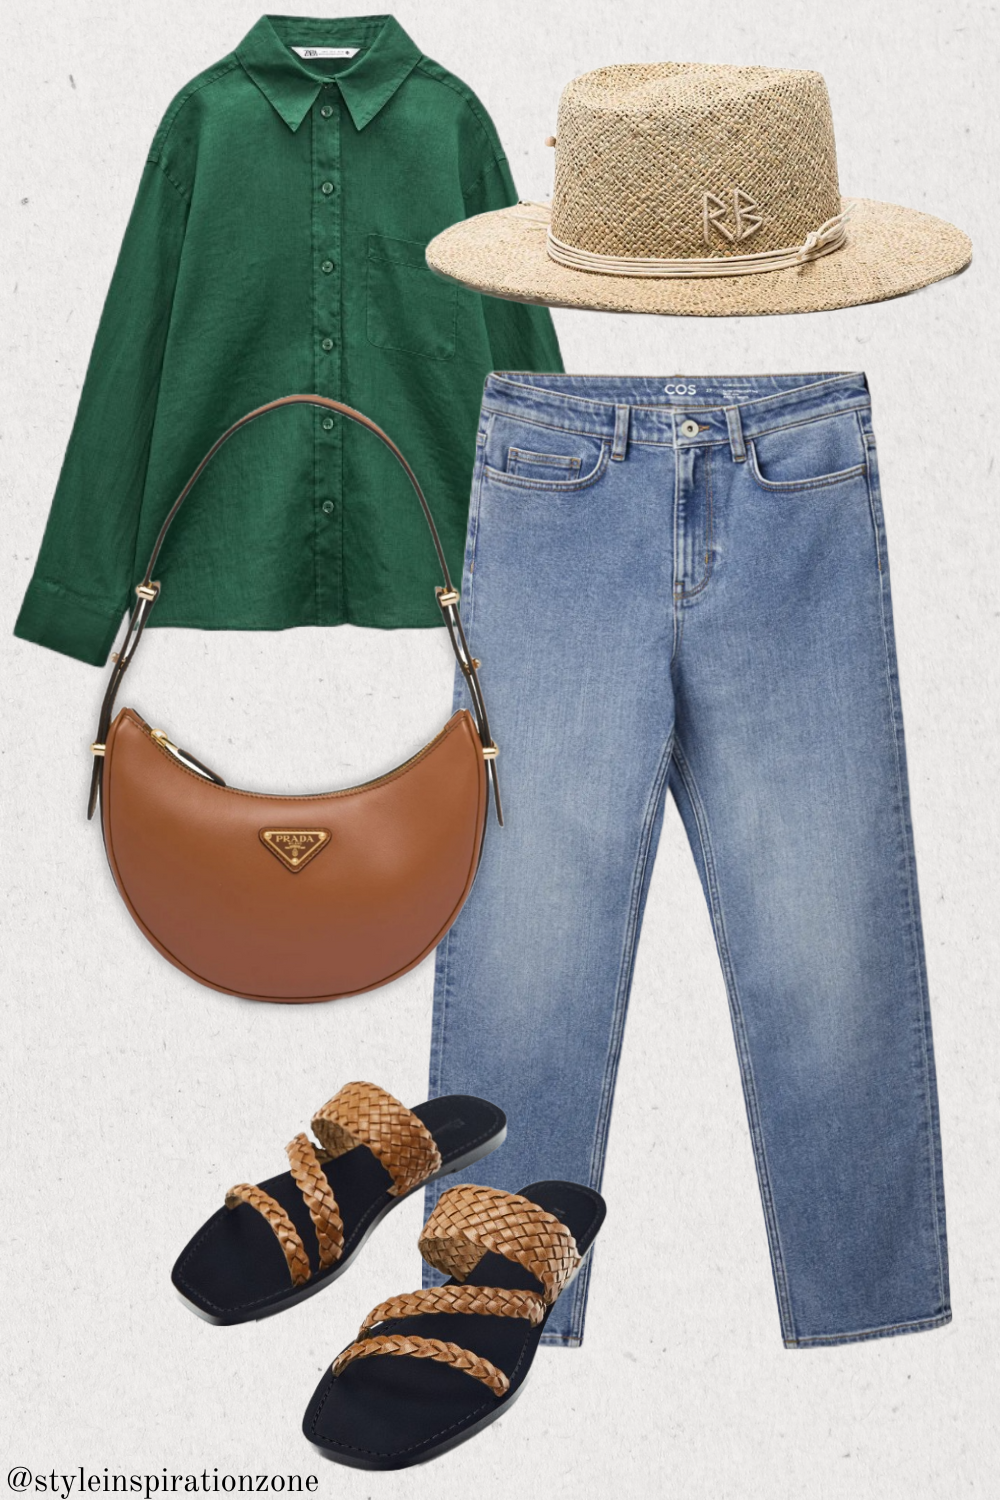 Straw Hat Chic Outfits